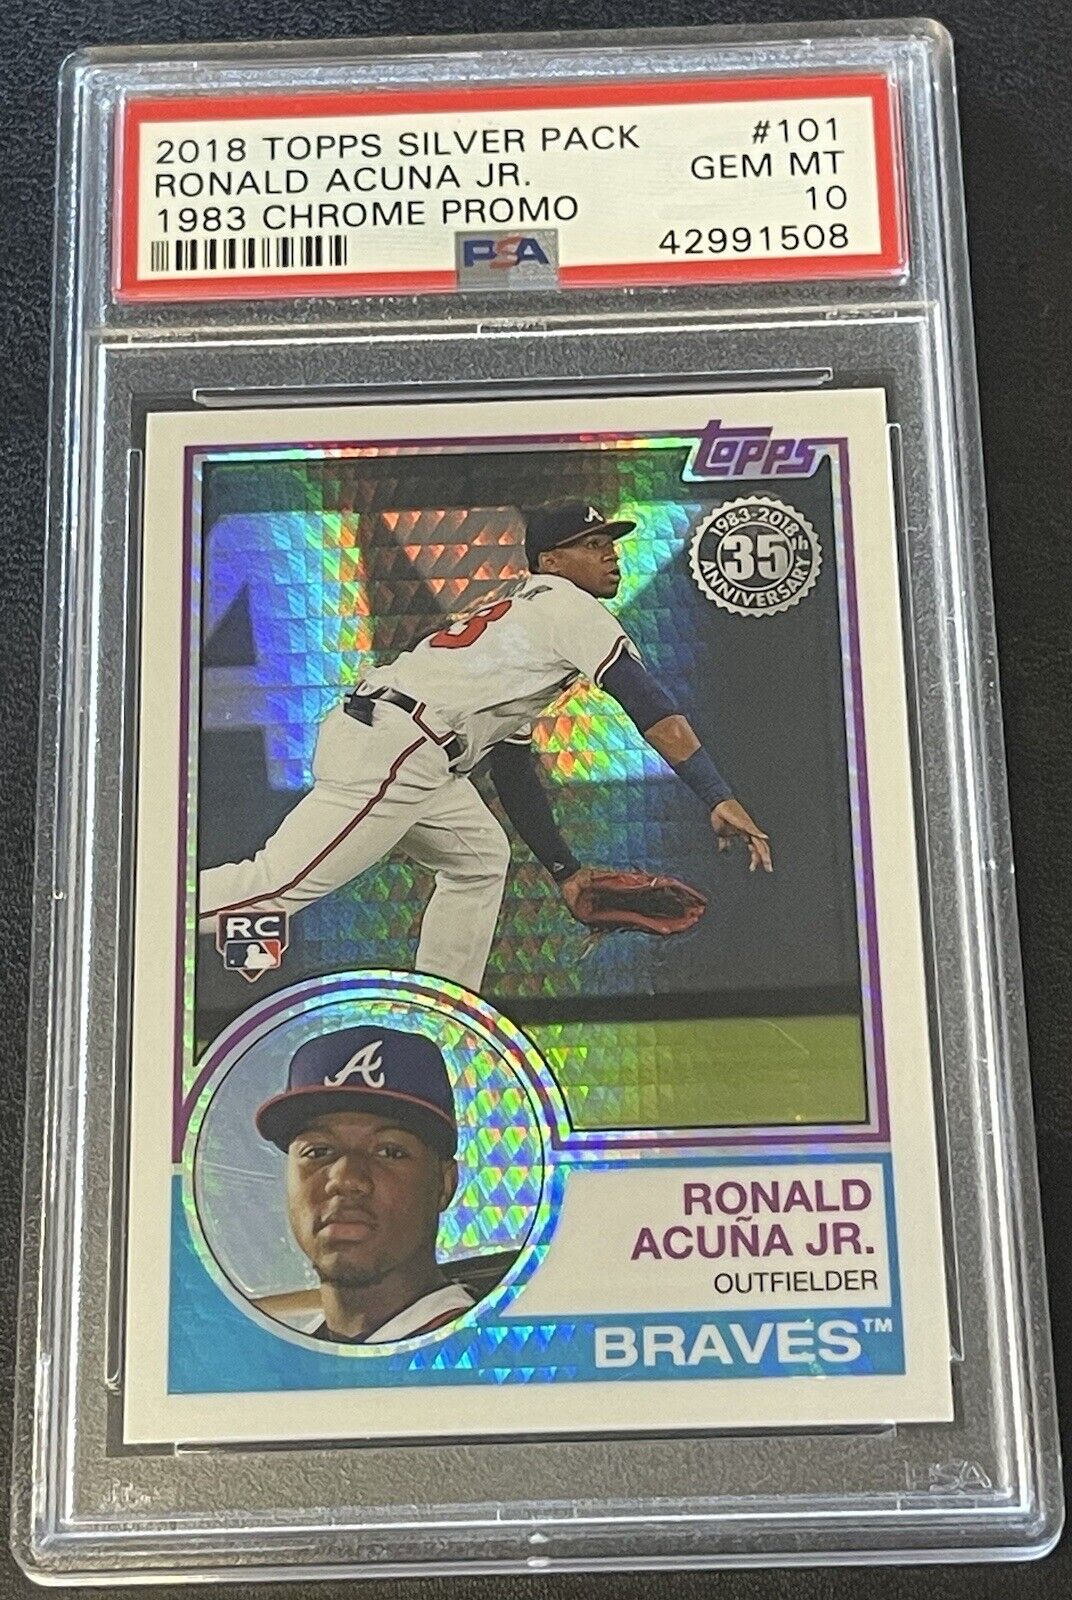 PSA 10 RONALD ACUNA 2018 TOPPS SILVER PACK 1983 CHROME ROOKIE REFRACTOR GEM MINT